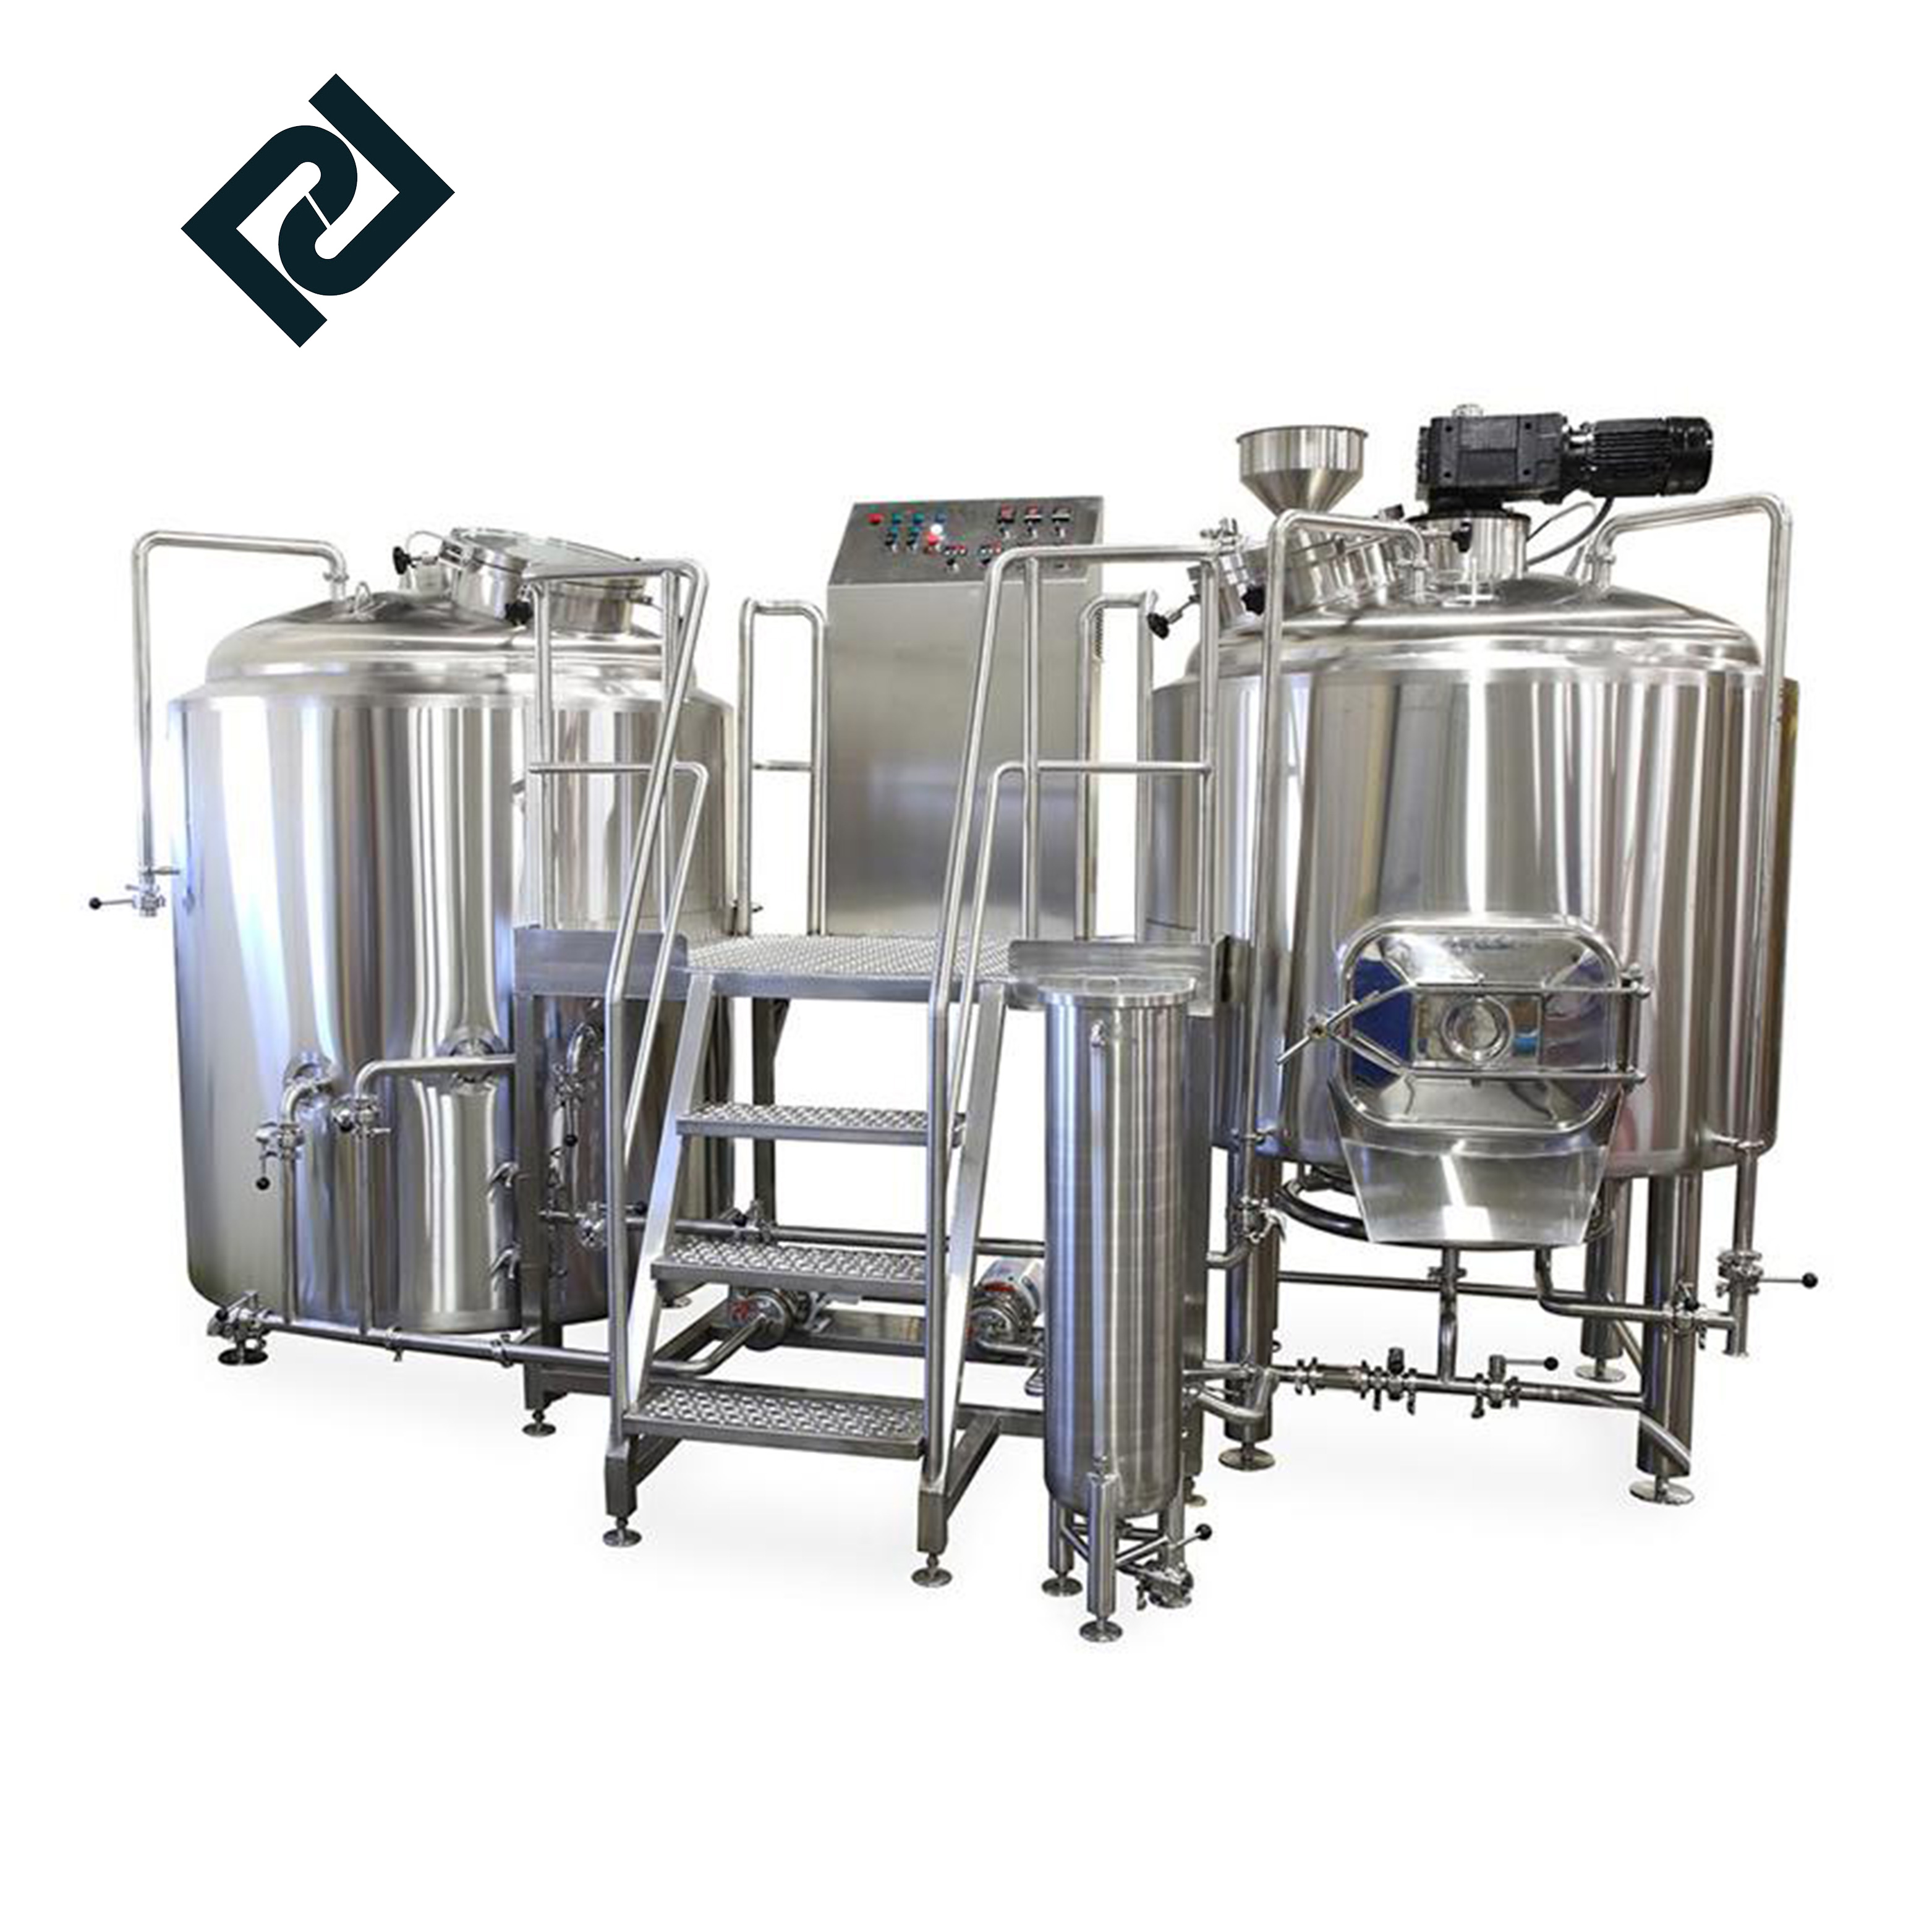 Cheap price 200l Mini Beer Brewing Equipment For Sale - 10bbl brite tank for beer 1000l beer fermenter tank 1000 liters beer brewing equipment – Pijiang